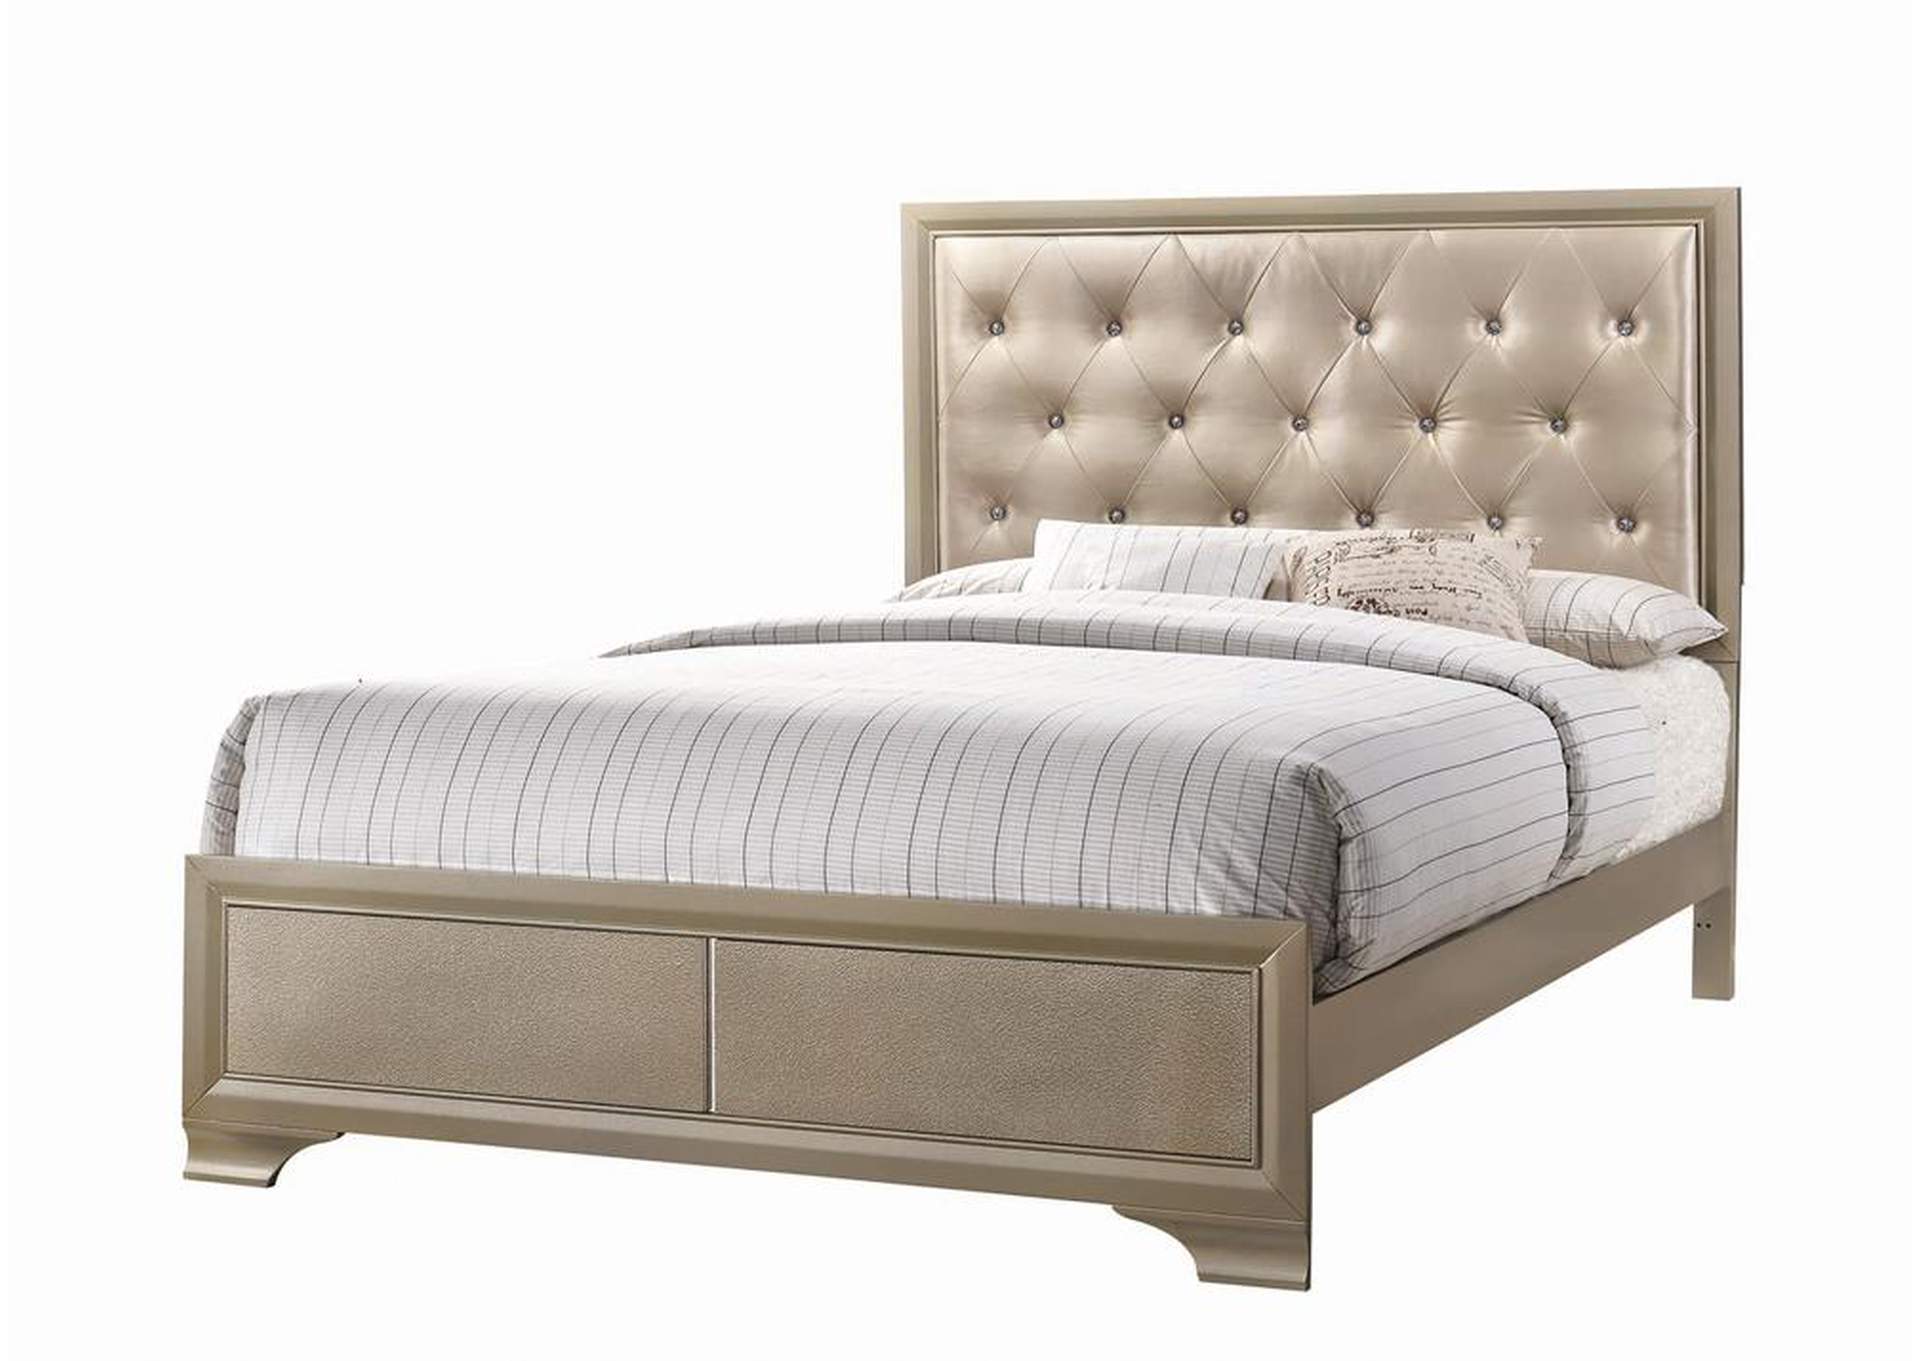 Beaumont Transitional Champagne Eastern, Transitional King Bed